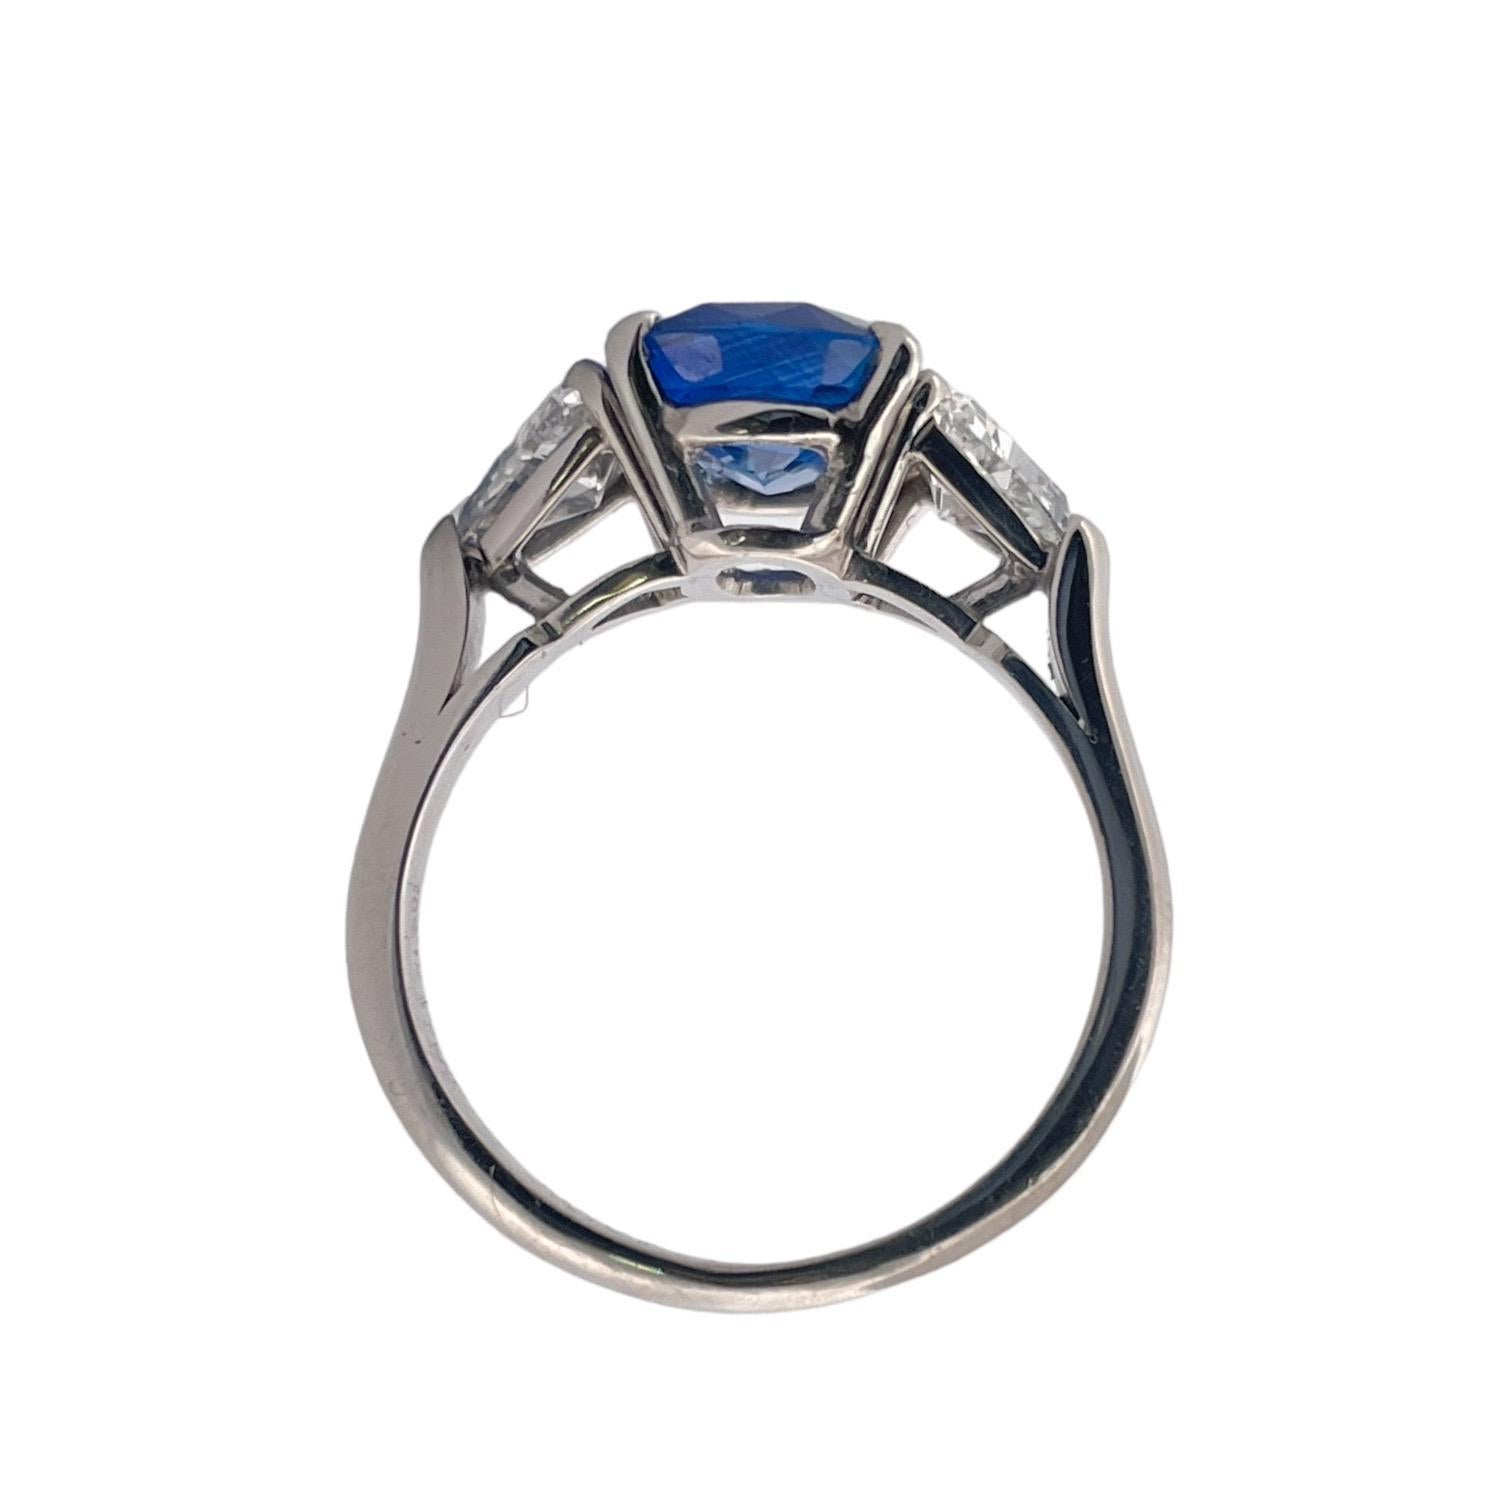 Elegant Cylon Sapphire Ring with Trillion Cut Diamond in Platinum In Good Condition For Sale In New York, NY